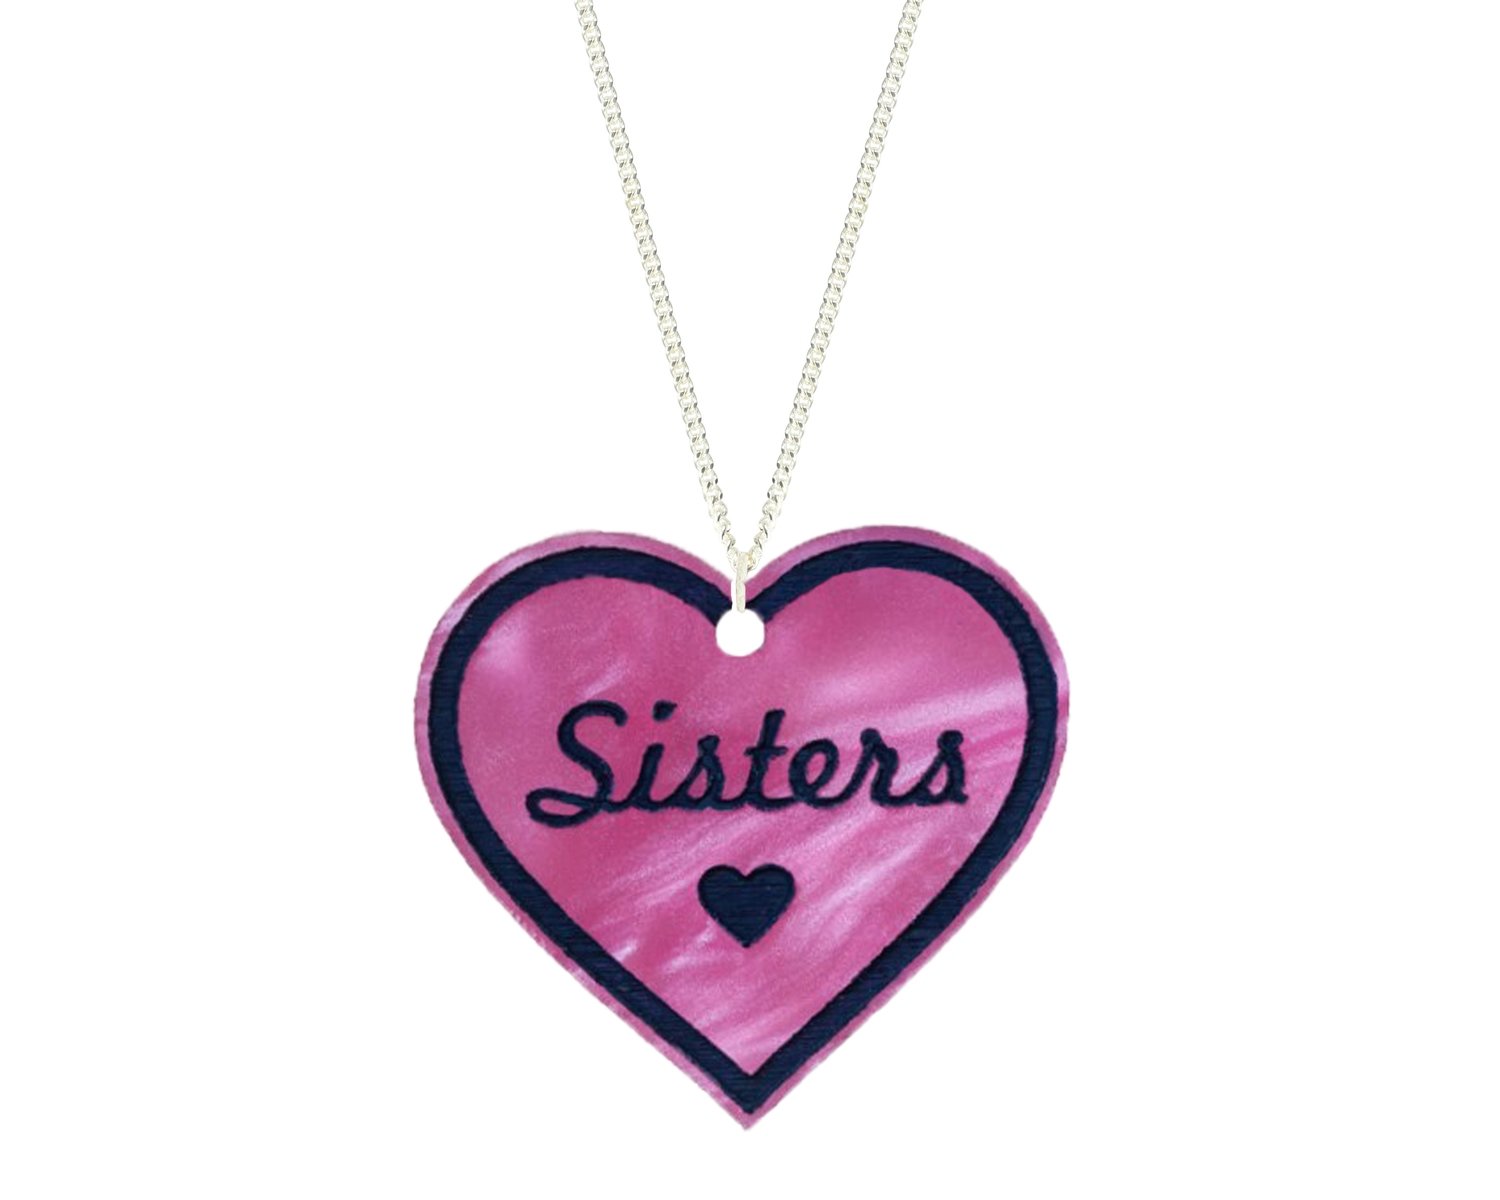 Heart with Sisters Pendant Carved Style Refined with Paint on Chain Necklace